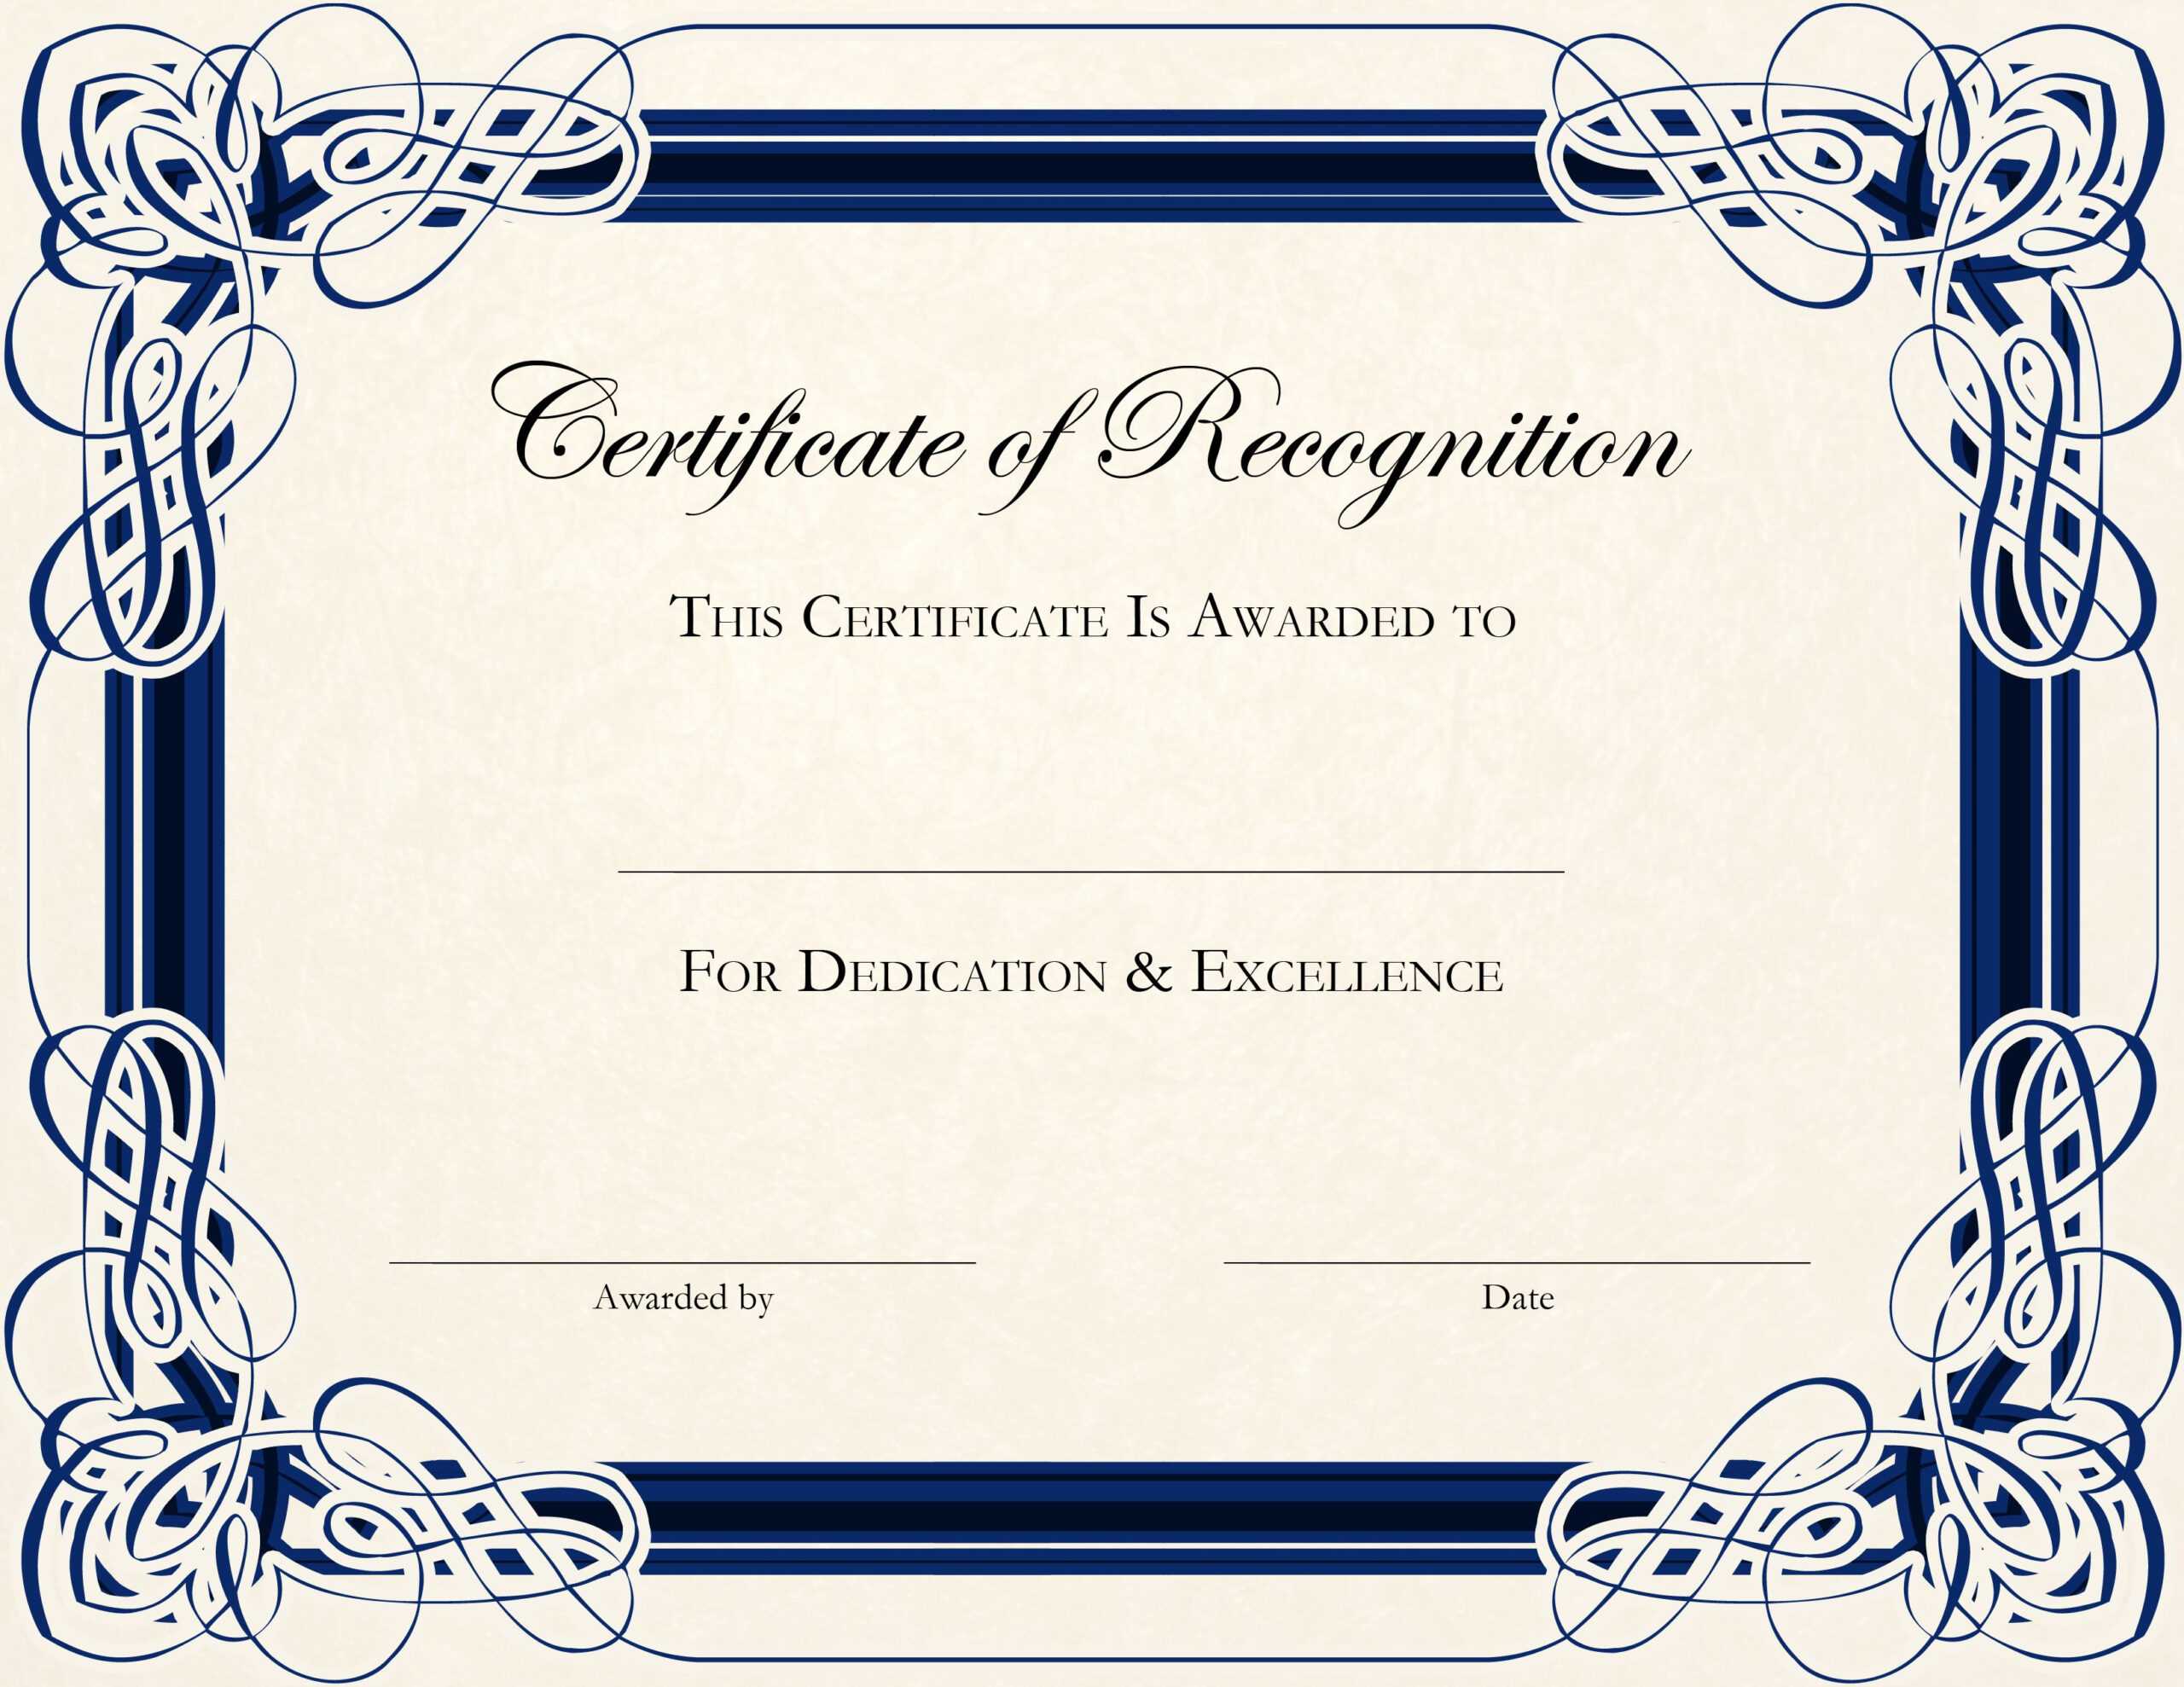 Certificate Template Designs Recognition Docs | Certificate Throughout Certificates Of Appreciation Template